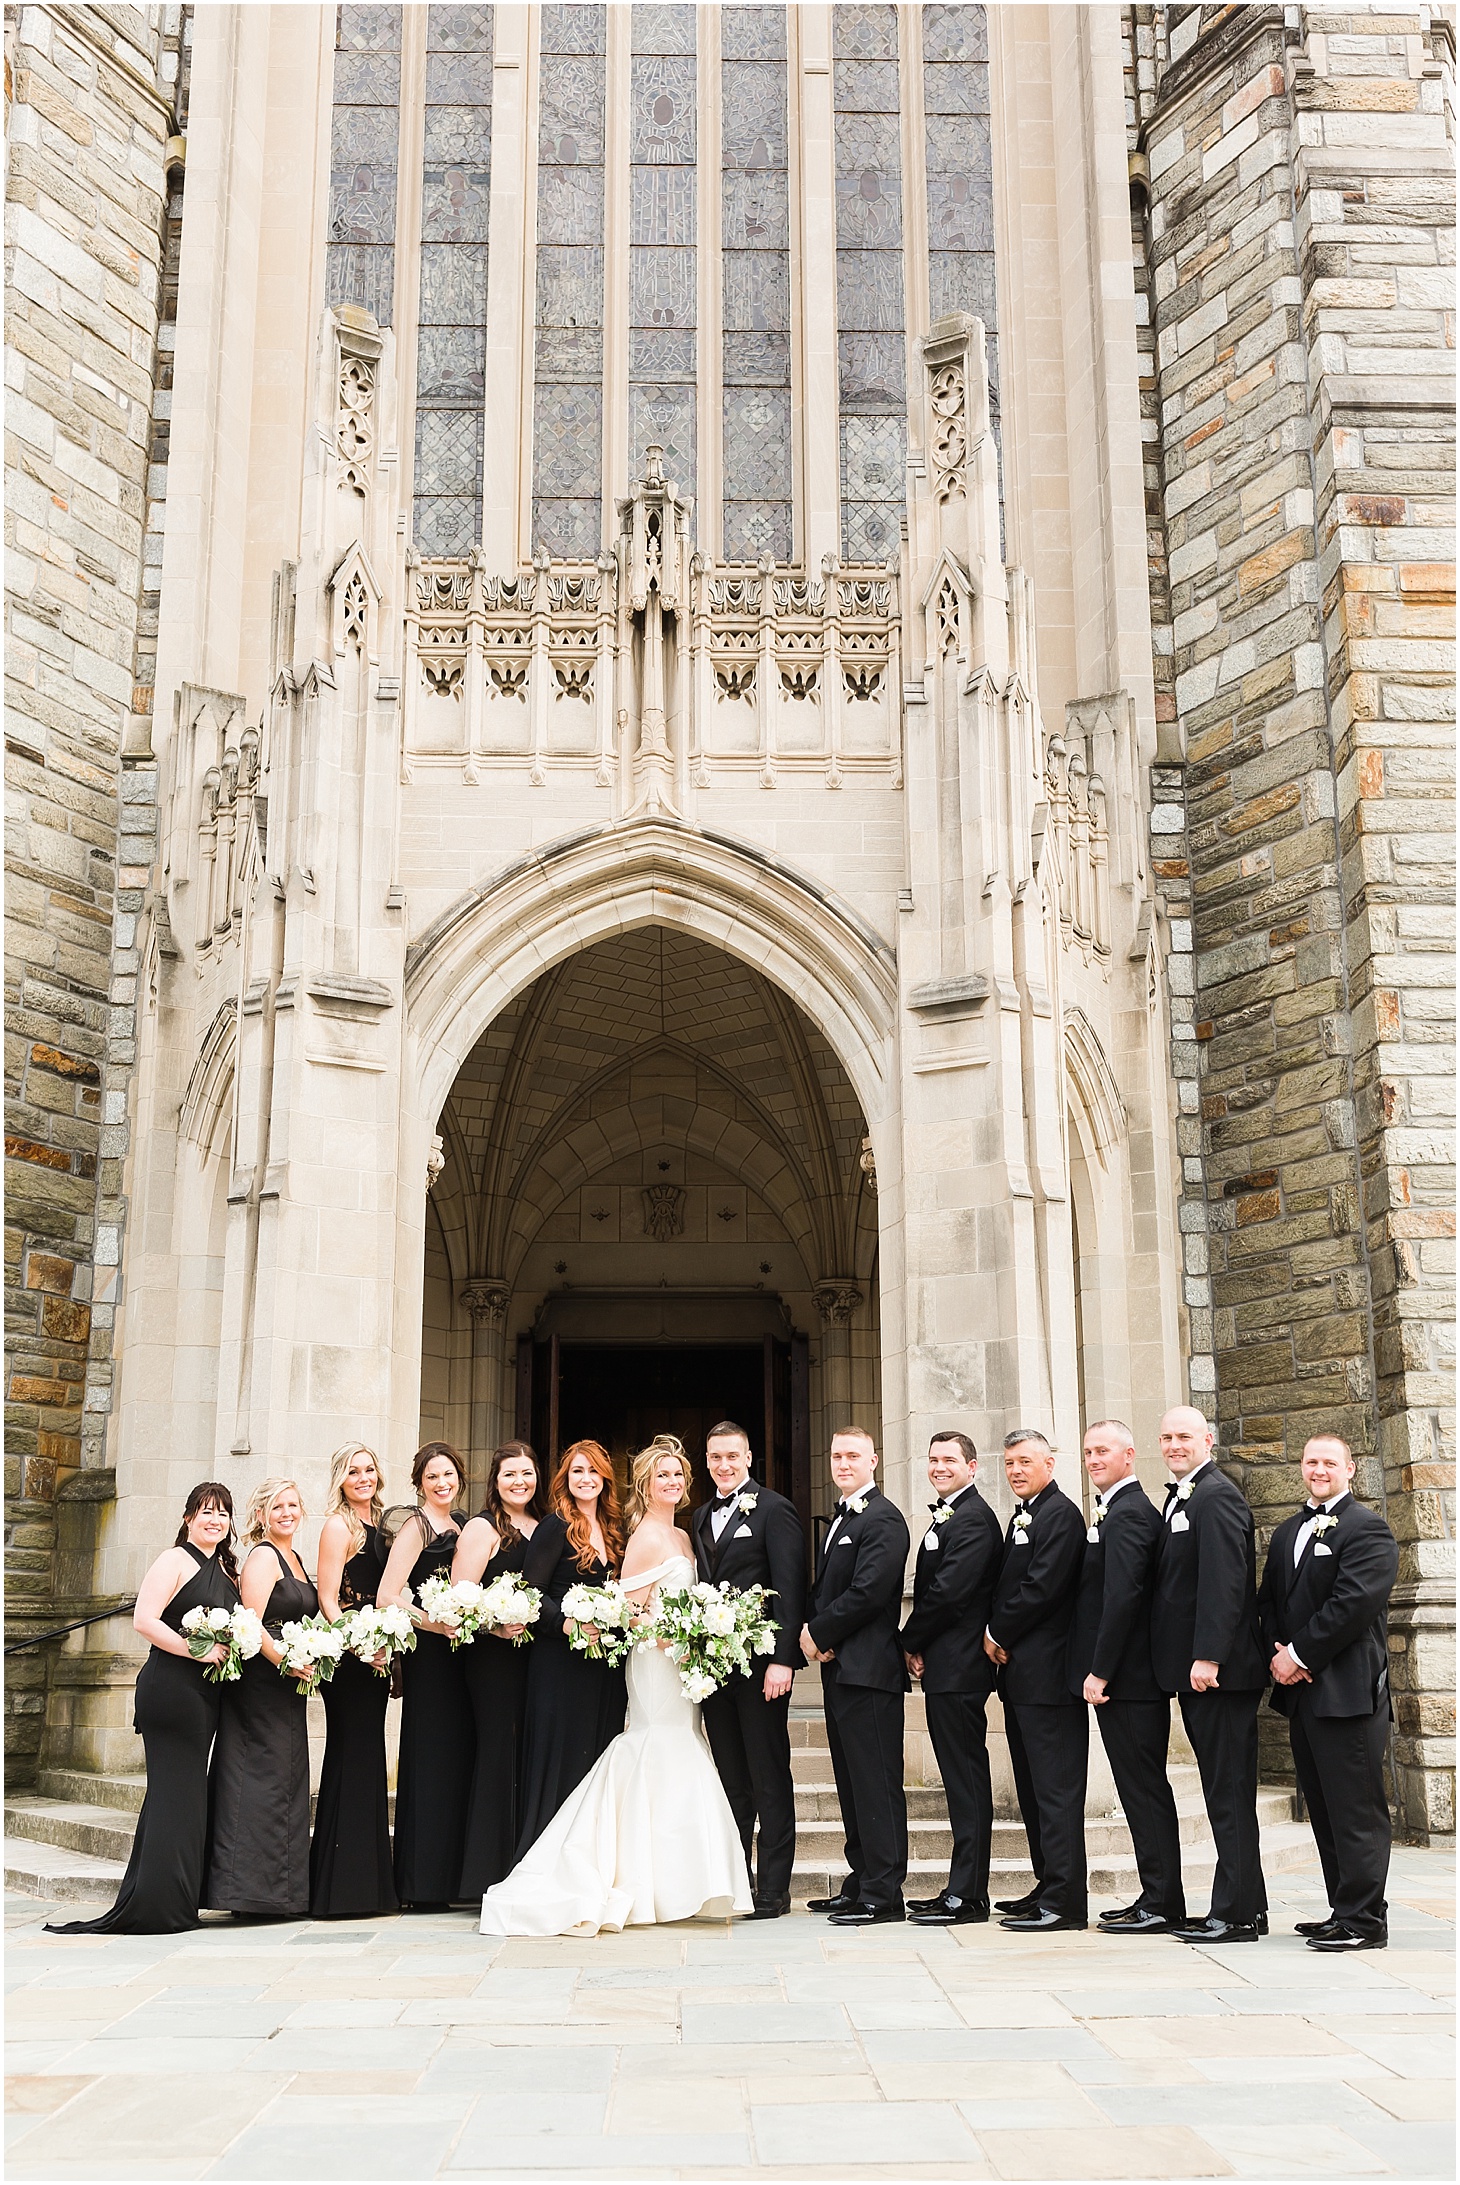 Wedding Party at National United Methodist Church, Modern Spring Wedding at The LINE Hotel DC, Wedding Ceremony at National United Methodist Church, Sarah Bradshaw Photography, DC Wedding Photographer